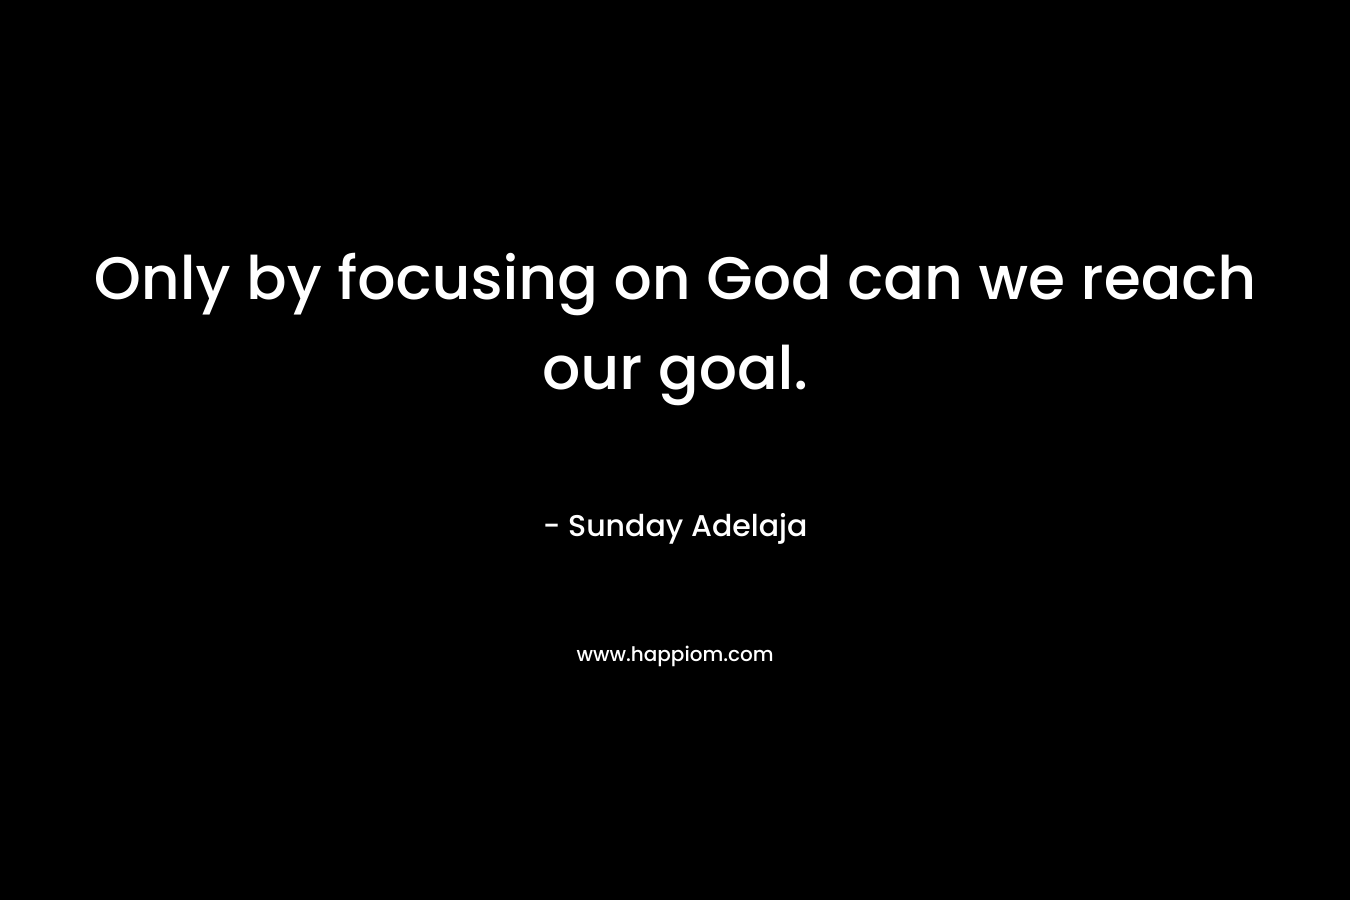 Only by focusing on God can we reach our goal.